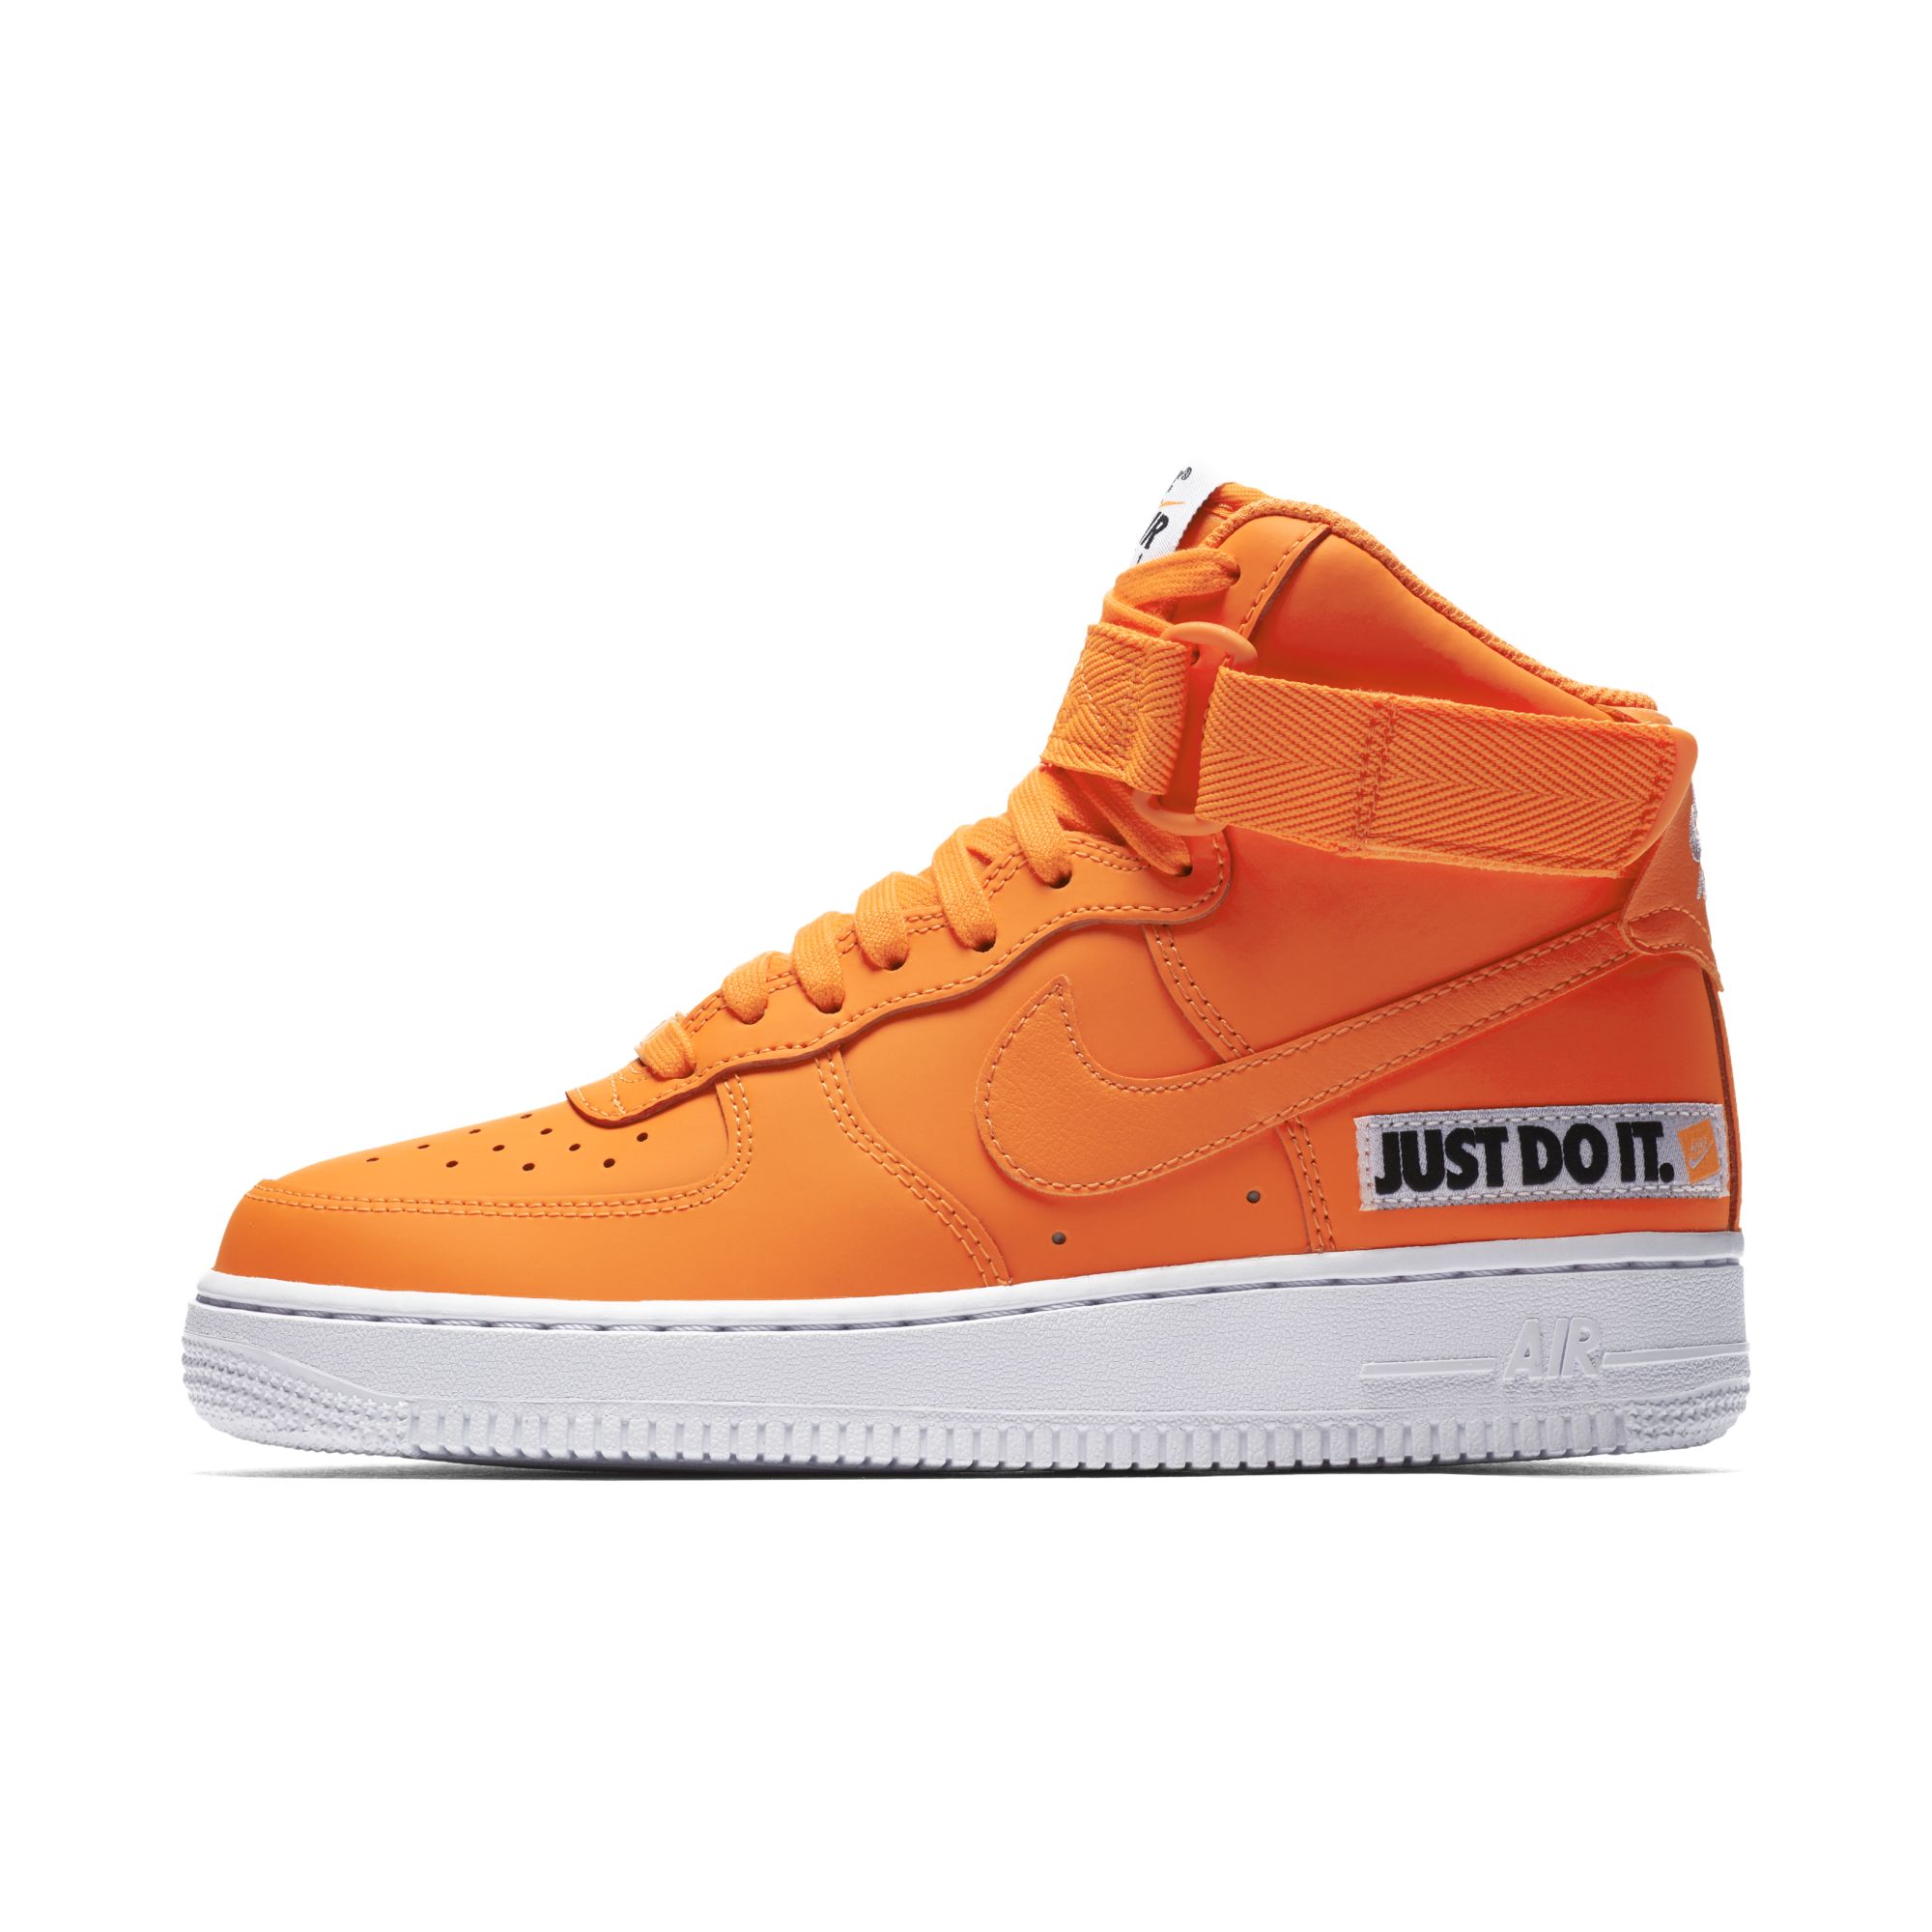 NIKE WMNS AIR FORCE 1 HIGH LX LEATHER TOTAL ORANGE WHITE 3